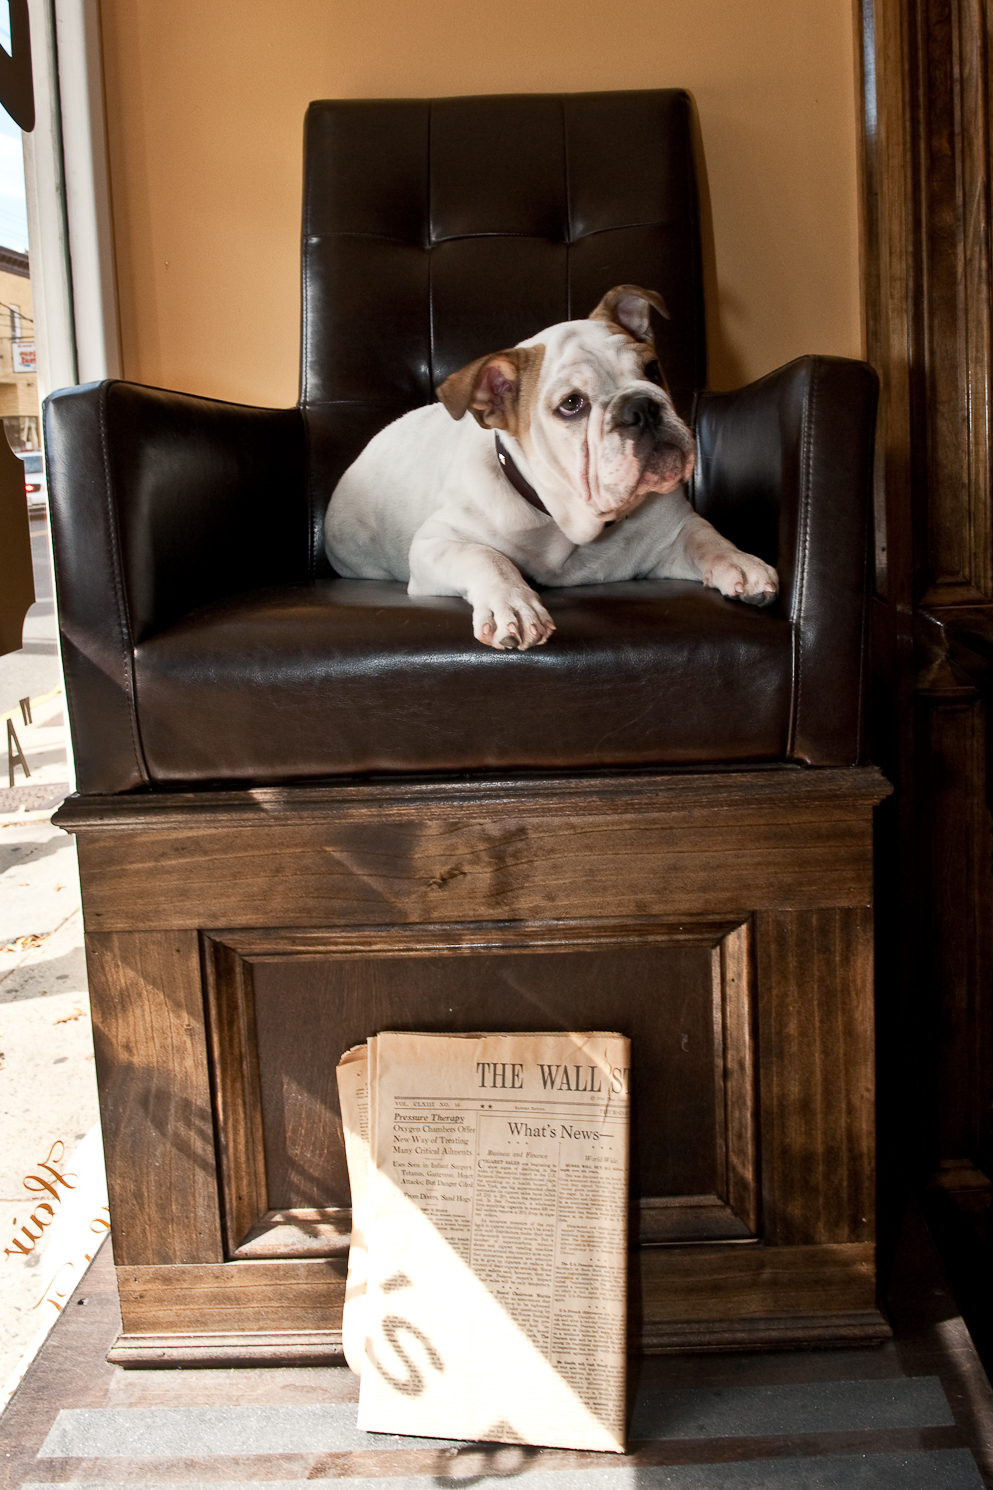 The Bulldog - The Living Room of the World